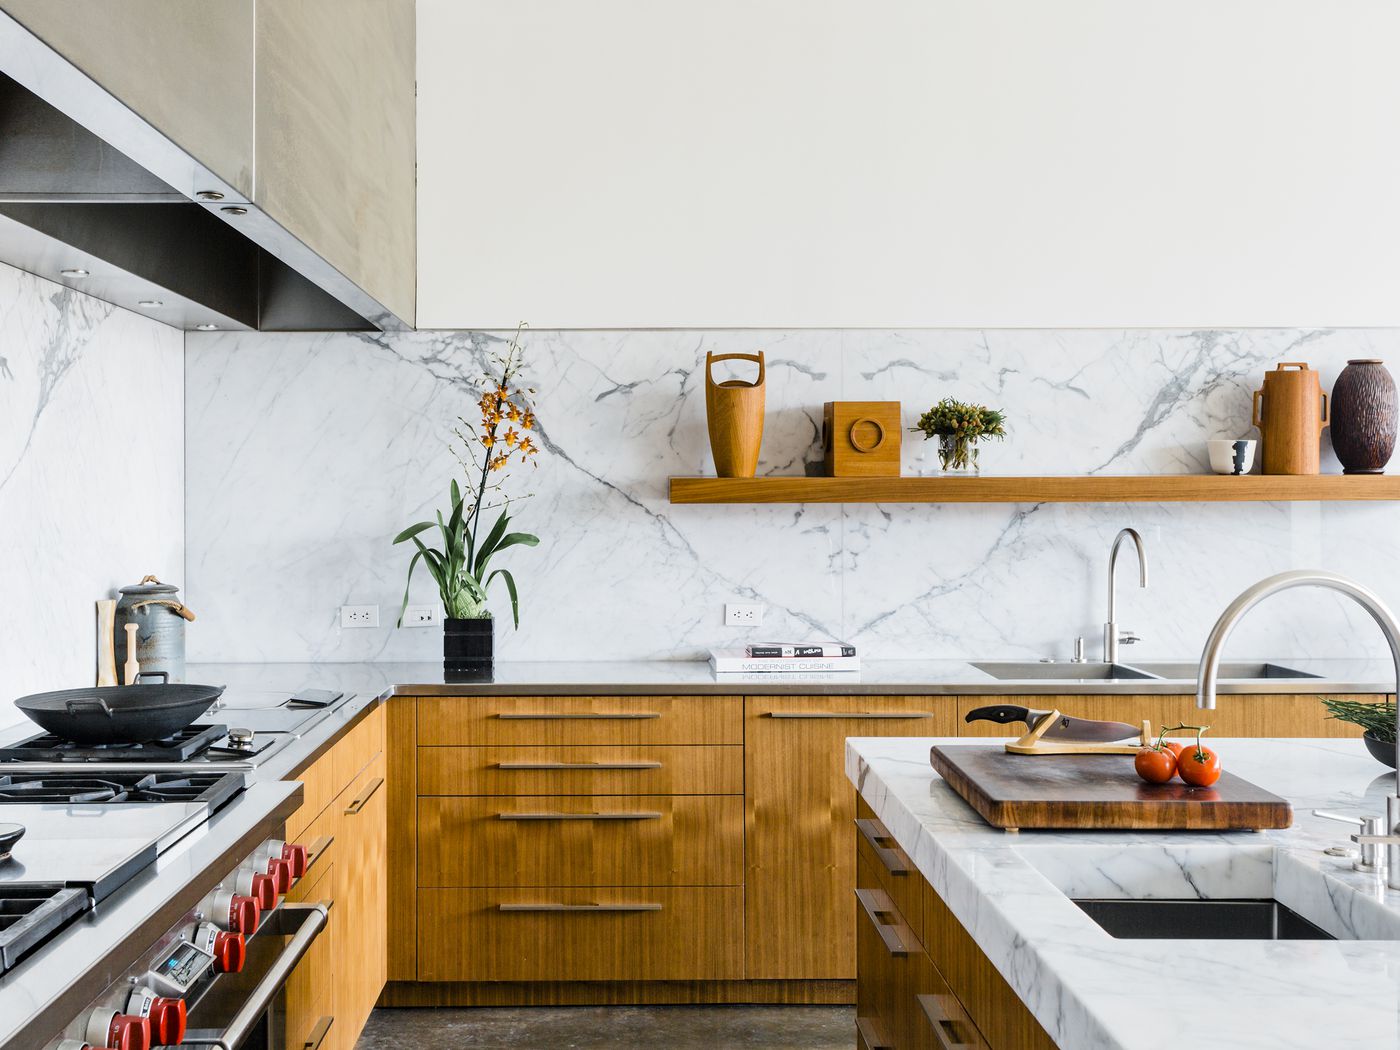 7 Features Interior Designers Want In Their Dream Kitchens